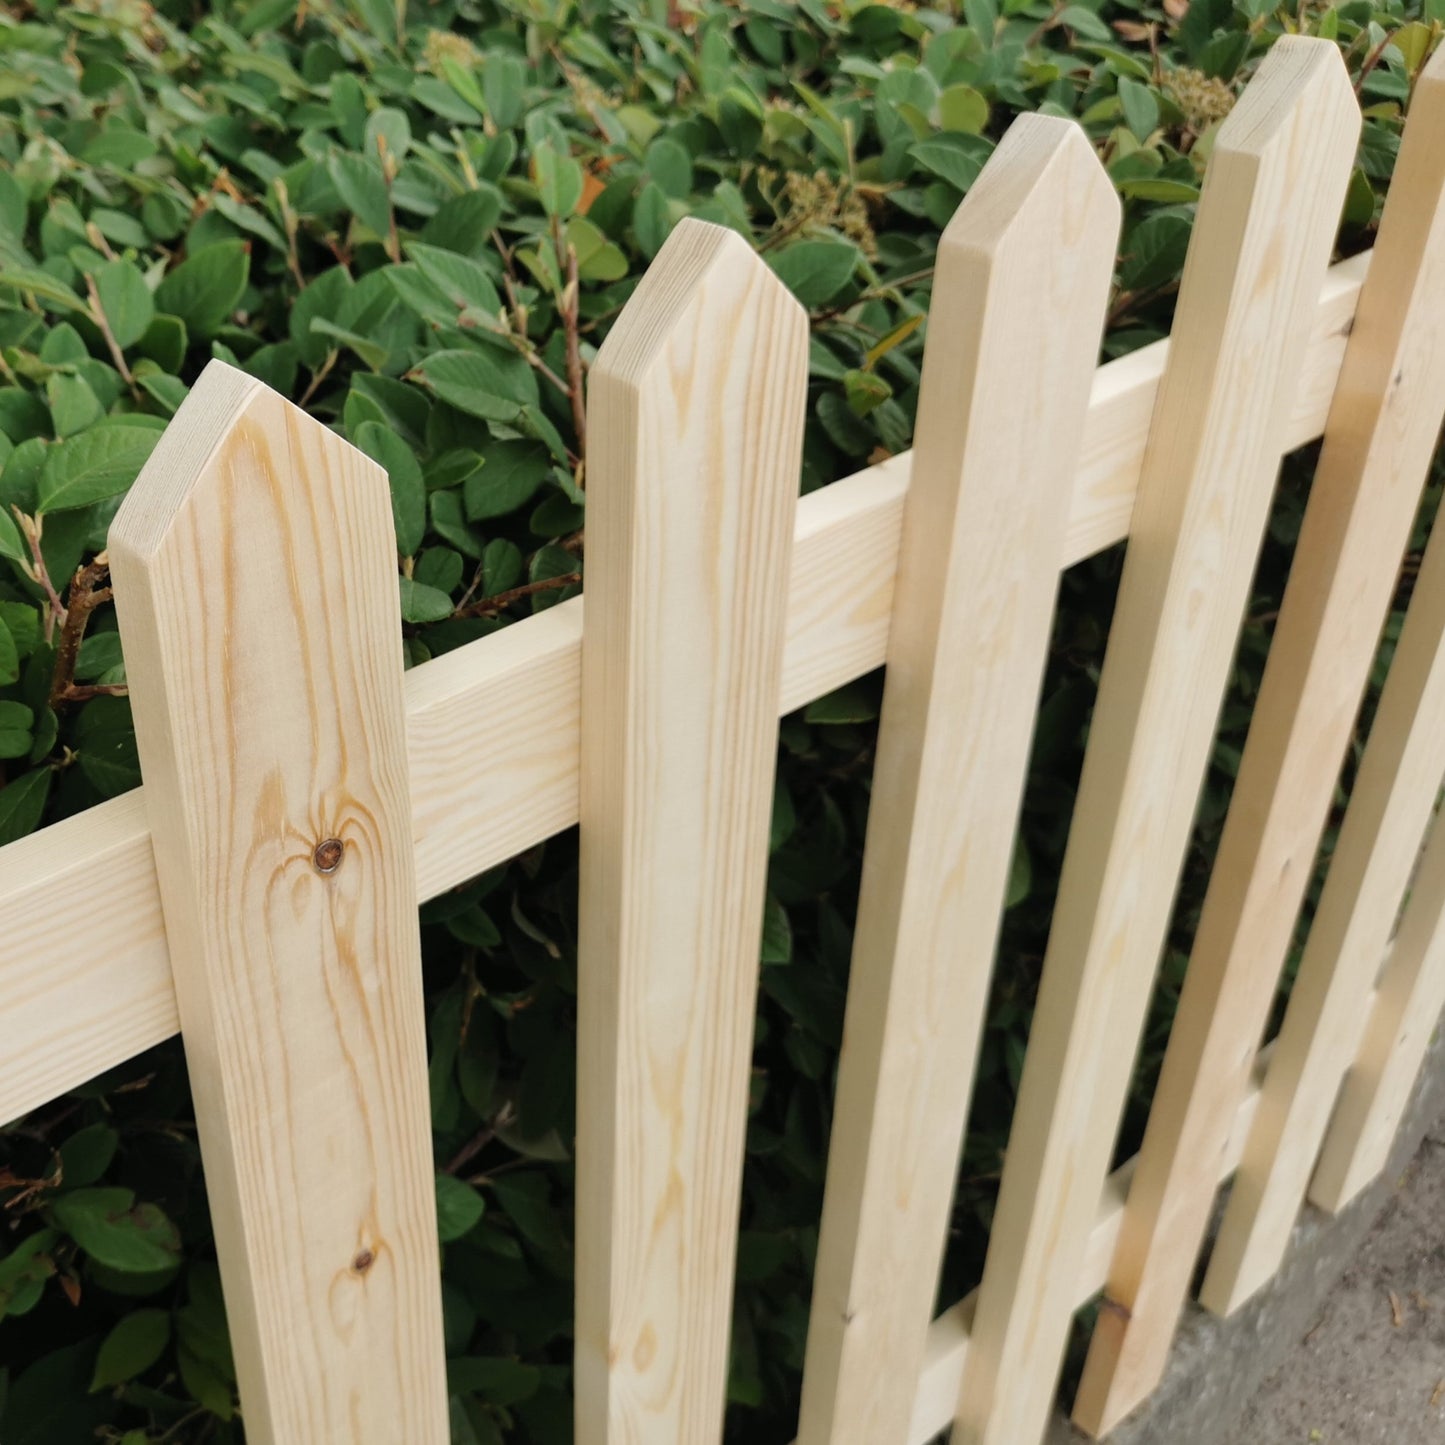 Freestanding Event Picket Fencing - Available in White, Natural & Coloured finishes